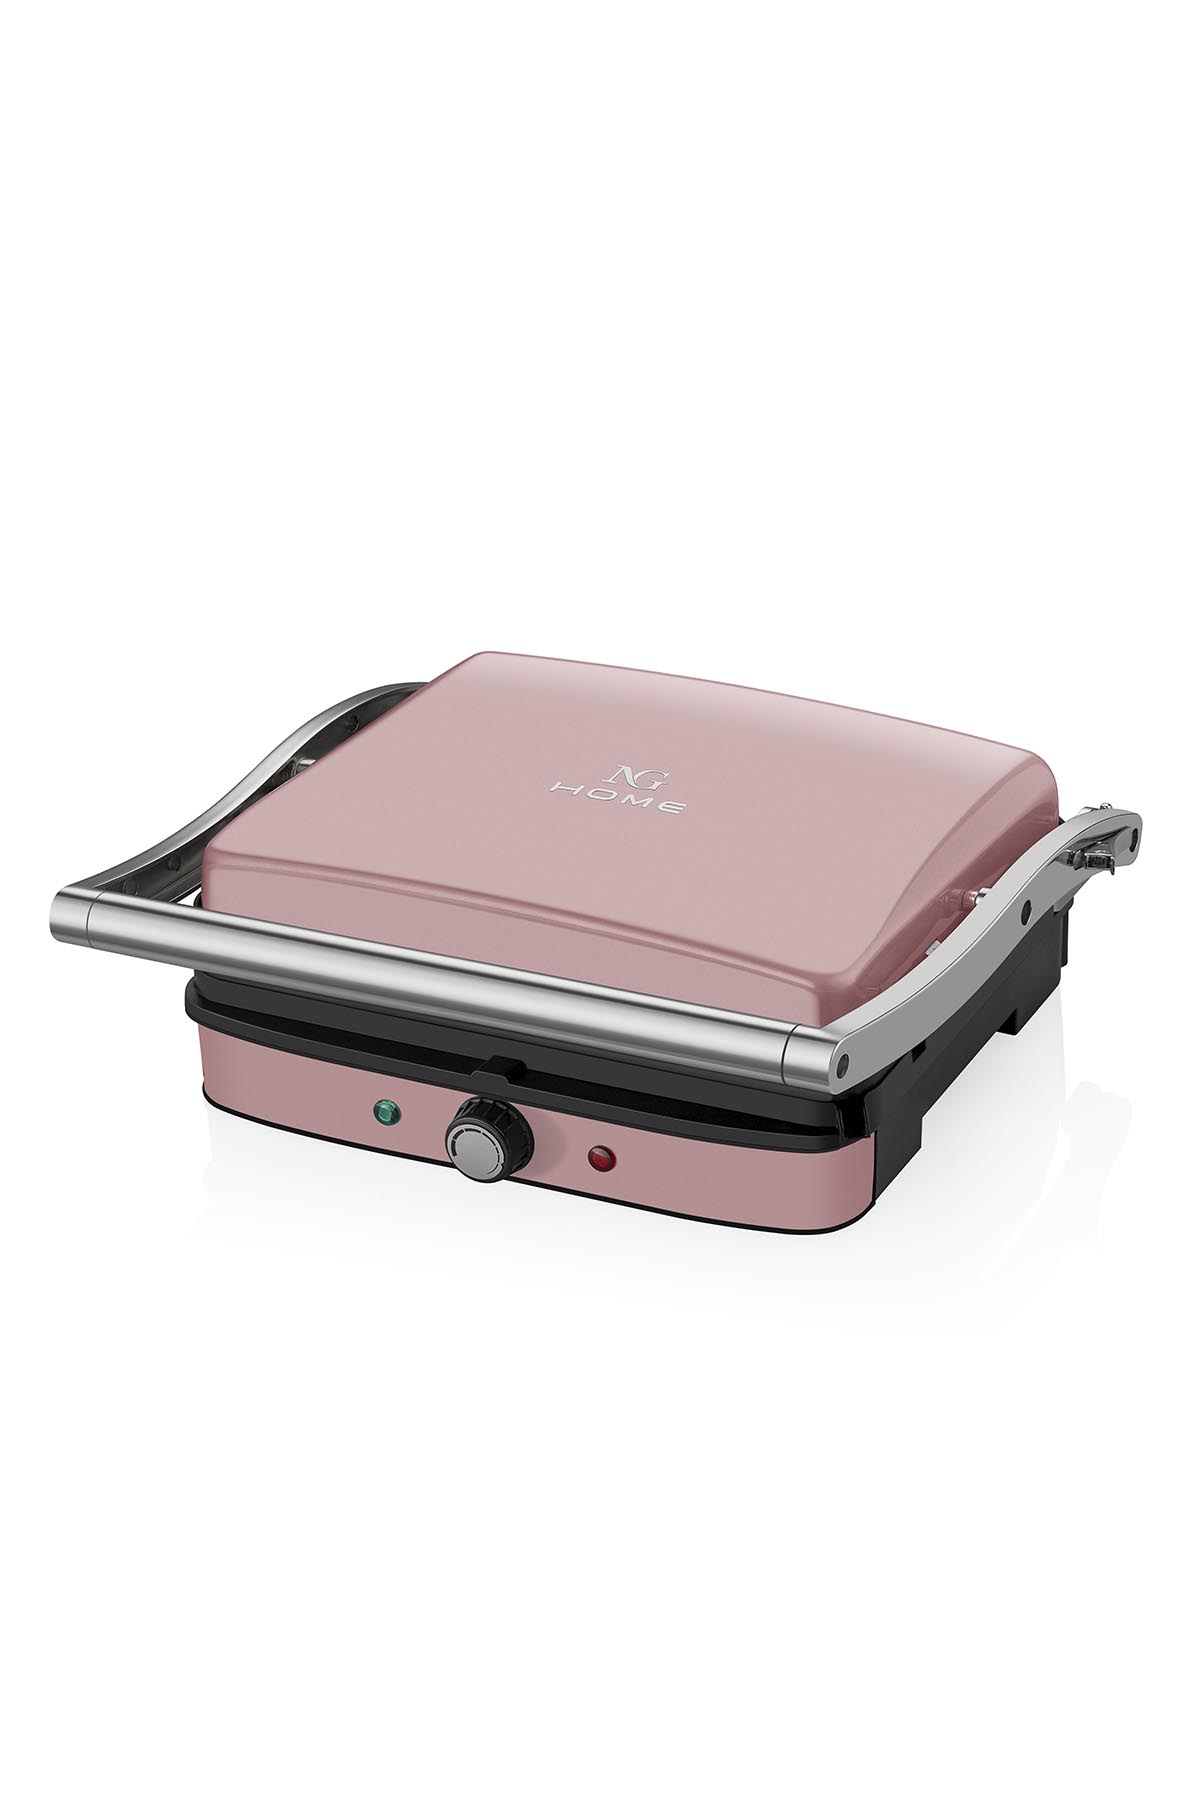 NG HOME RETRO PLUS TOST MAKİNESİ ROSE - 2